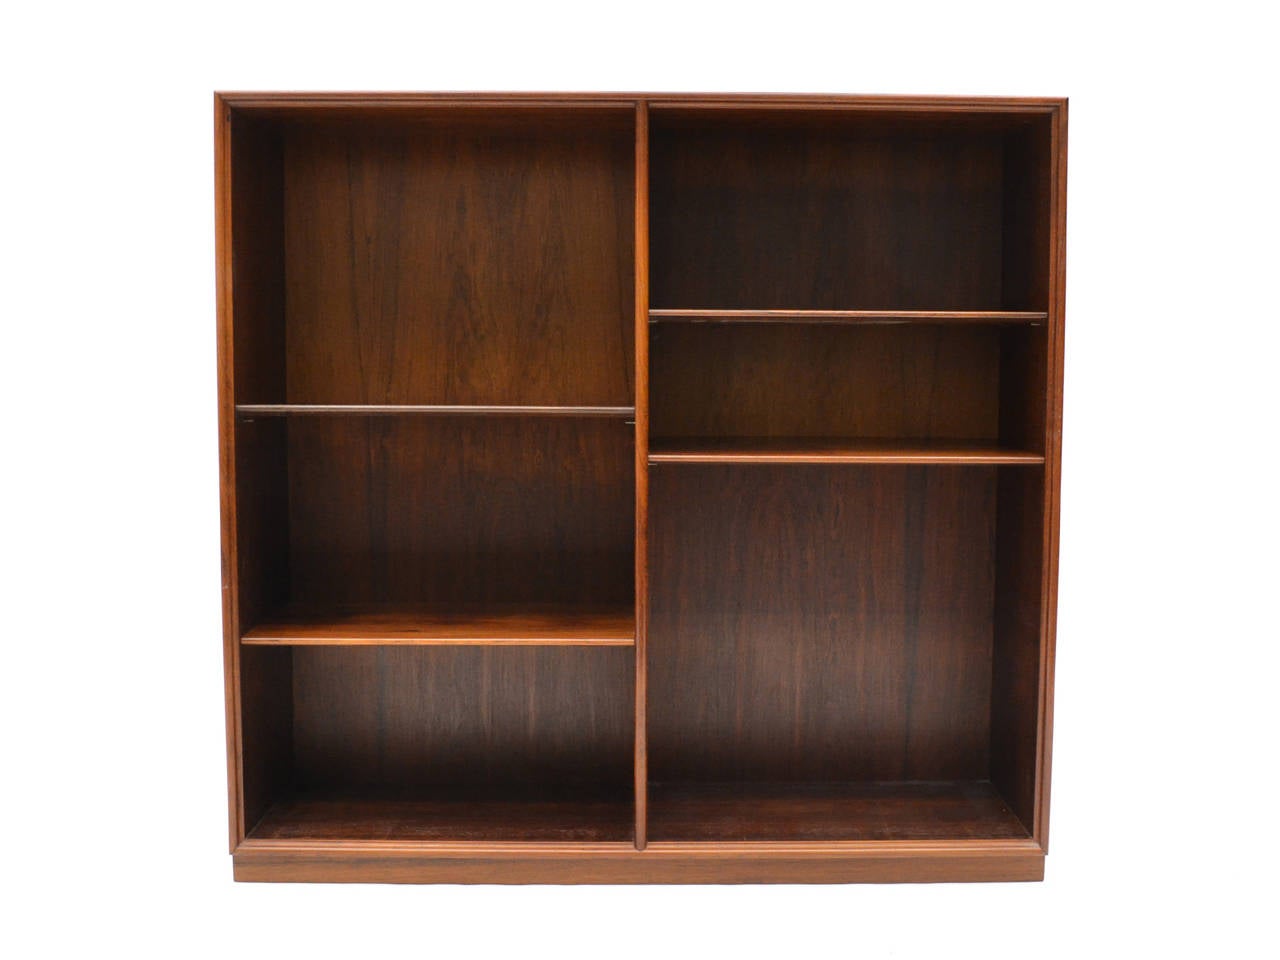 Beautiful and highly functional, this rosewood bookcase has two banks with four adjustable shelves. The case, which sits on a plinth base, has fluted edges giving it a delicate appearance, mitered corners, and an unusual extension of the top on the